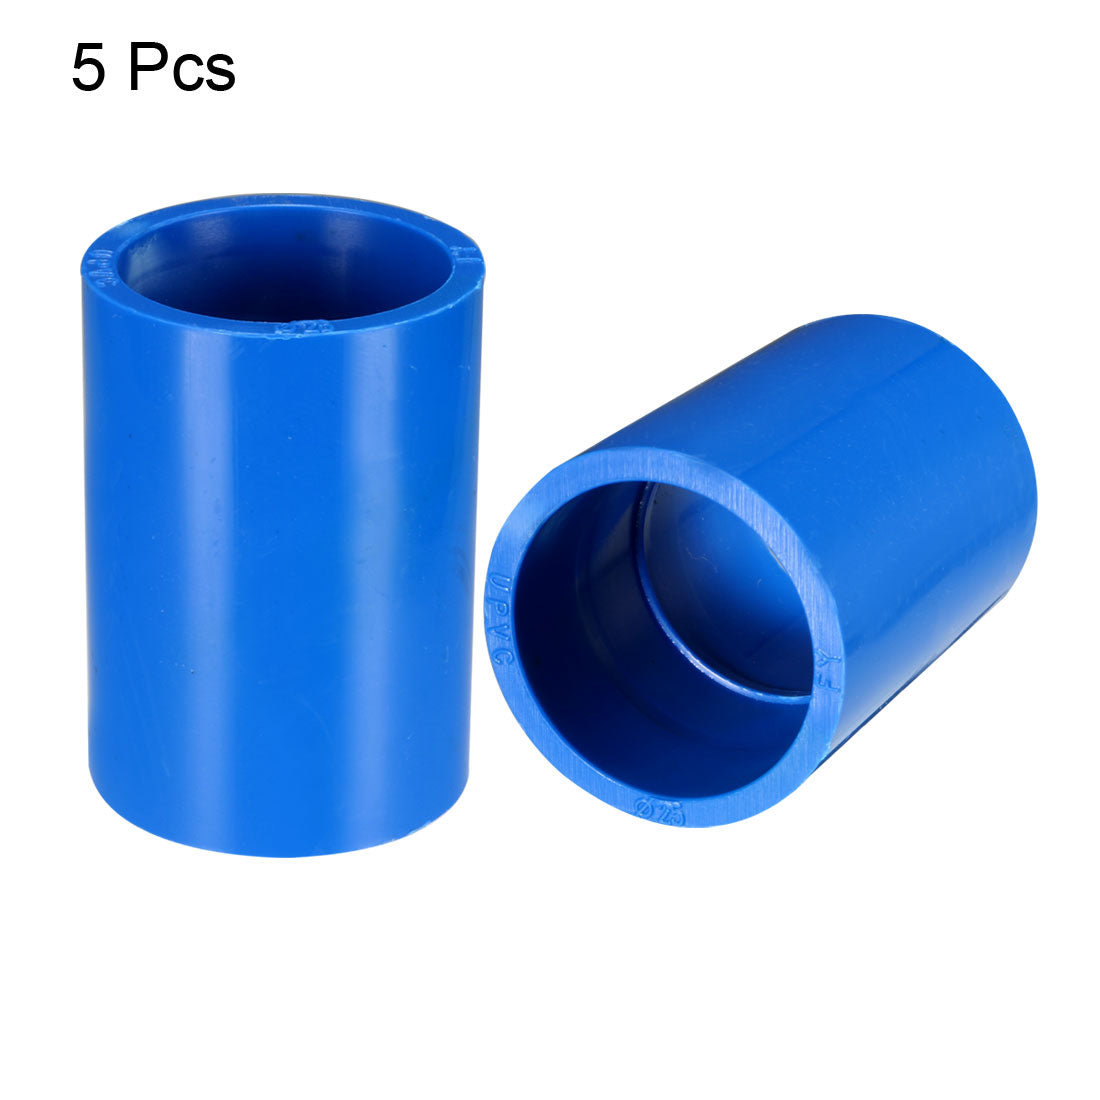 uxcell Uxcell 25mm Straight PVC Pipe Fitting Coupling Adapter Connector Blue 5Pcs